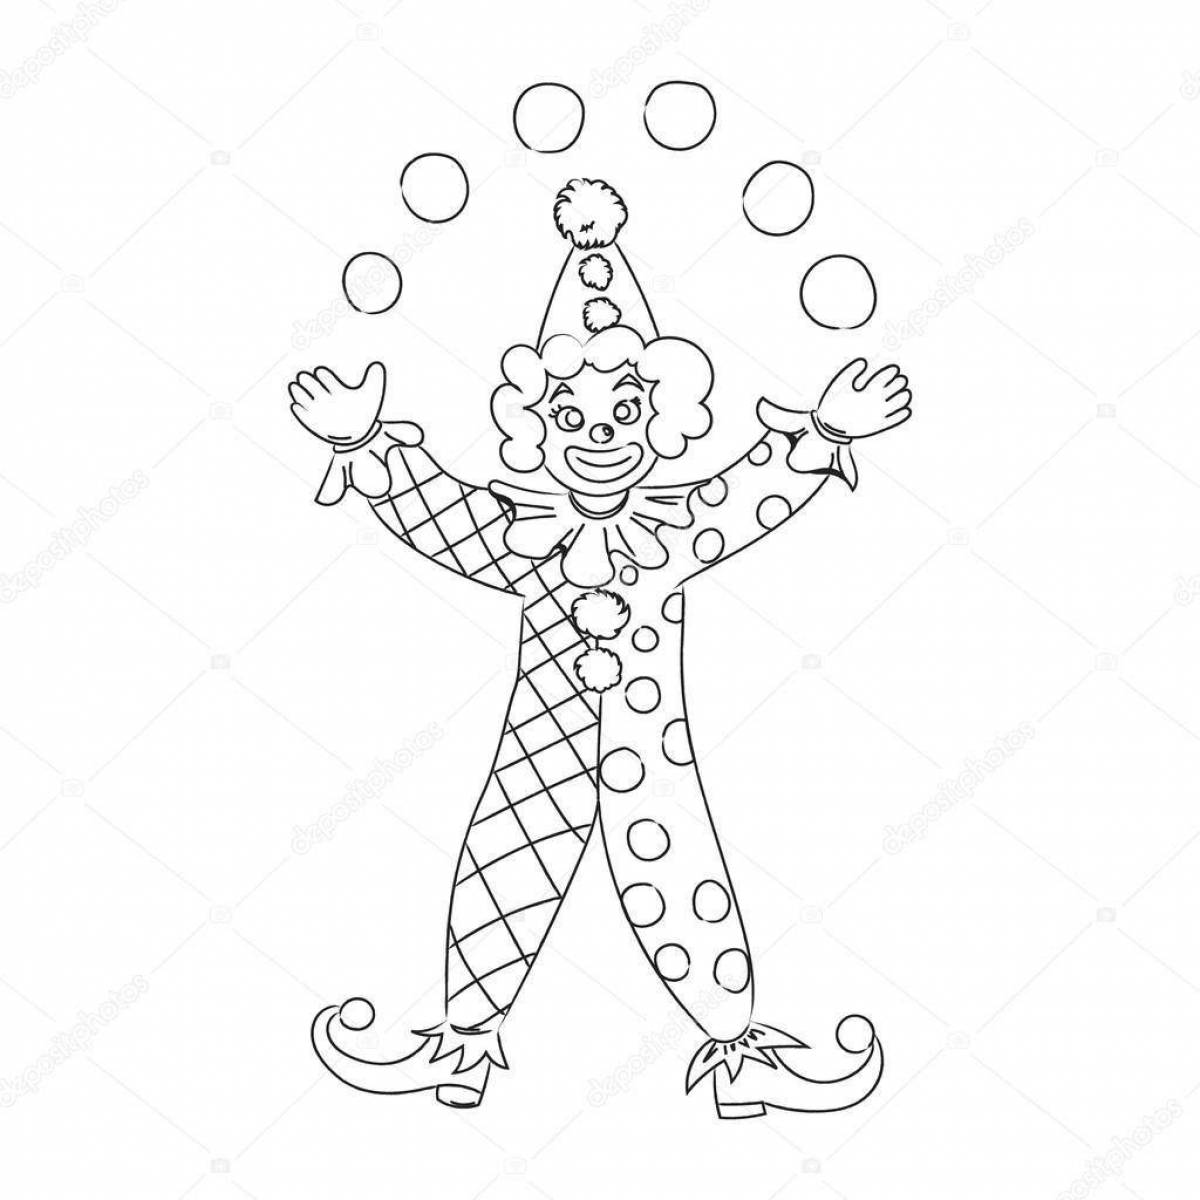 Coloring page of cheerful parsley